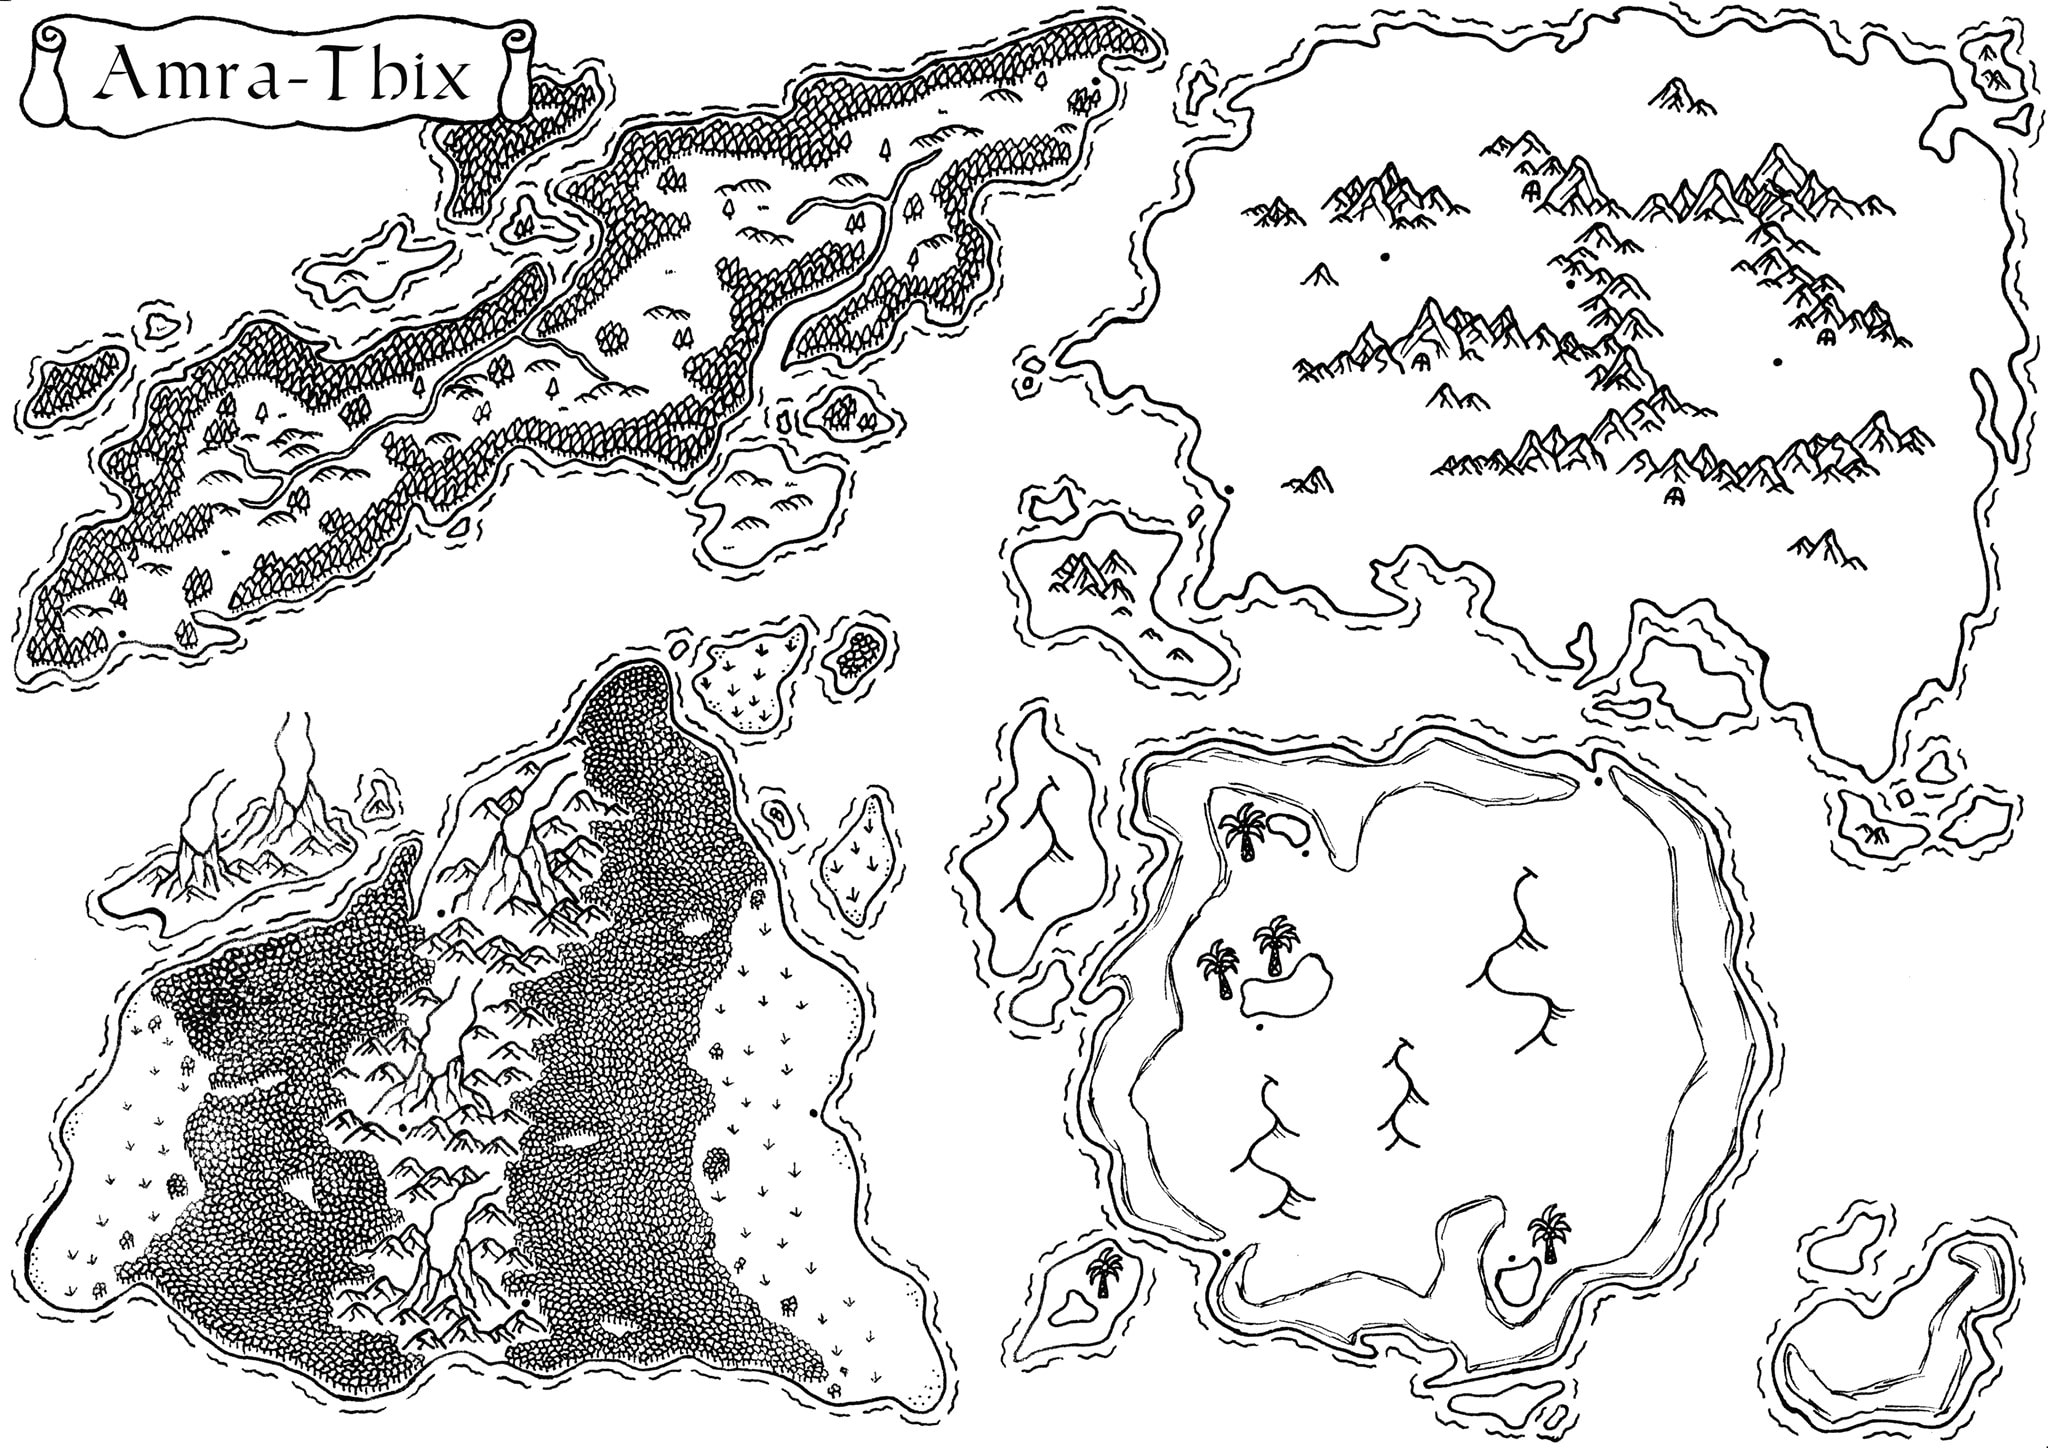 Drawing A Fantasy World Map Draw your fantasy world map by Clrcreations